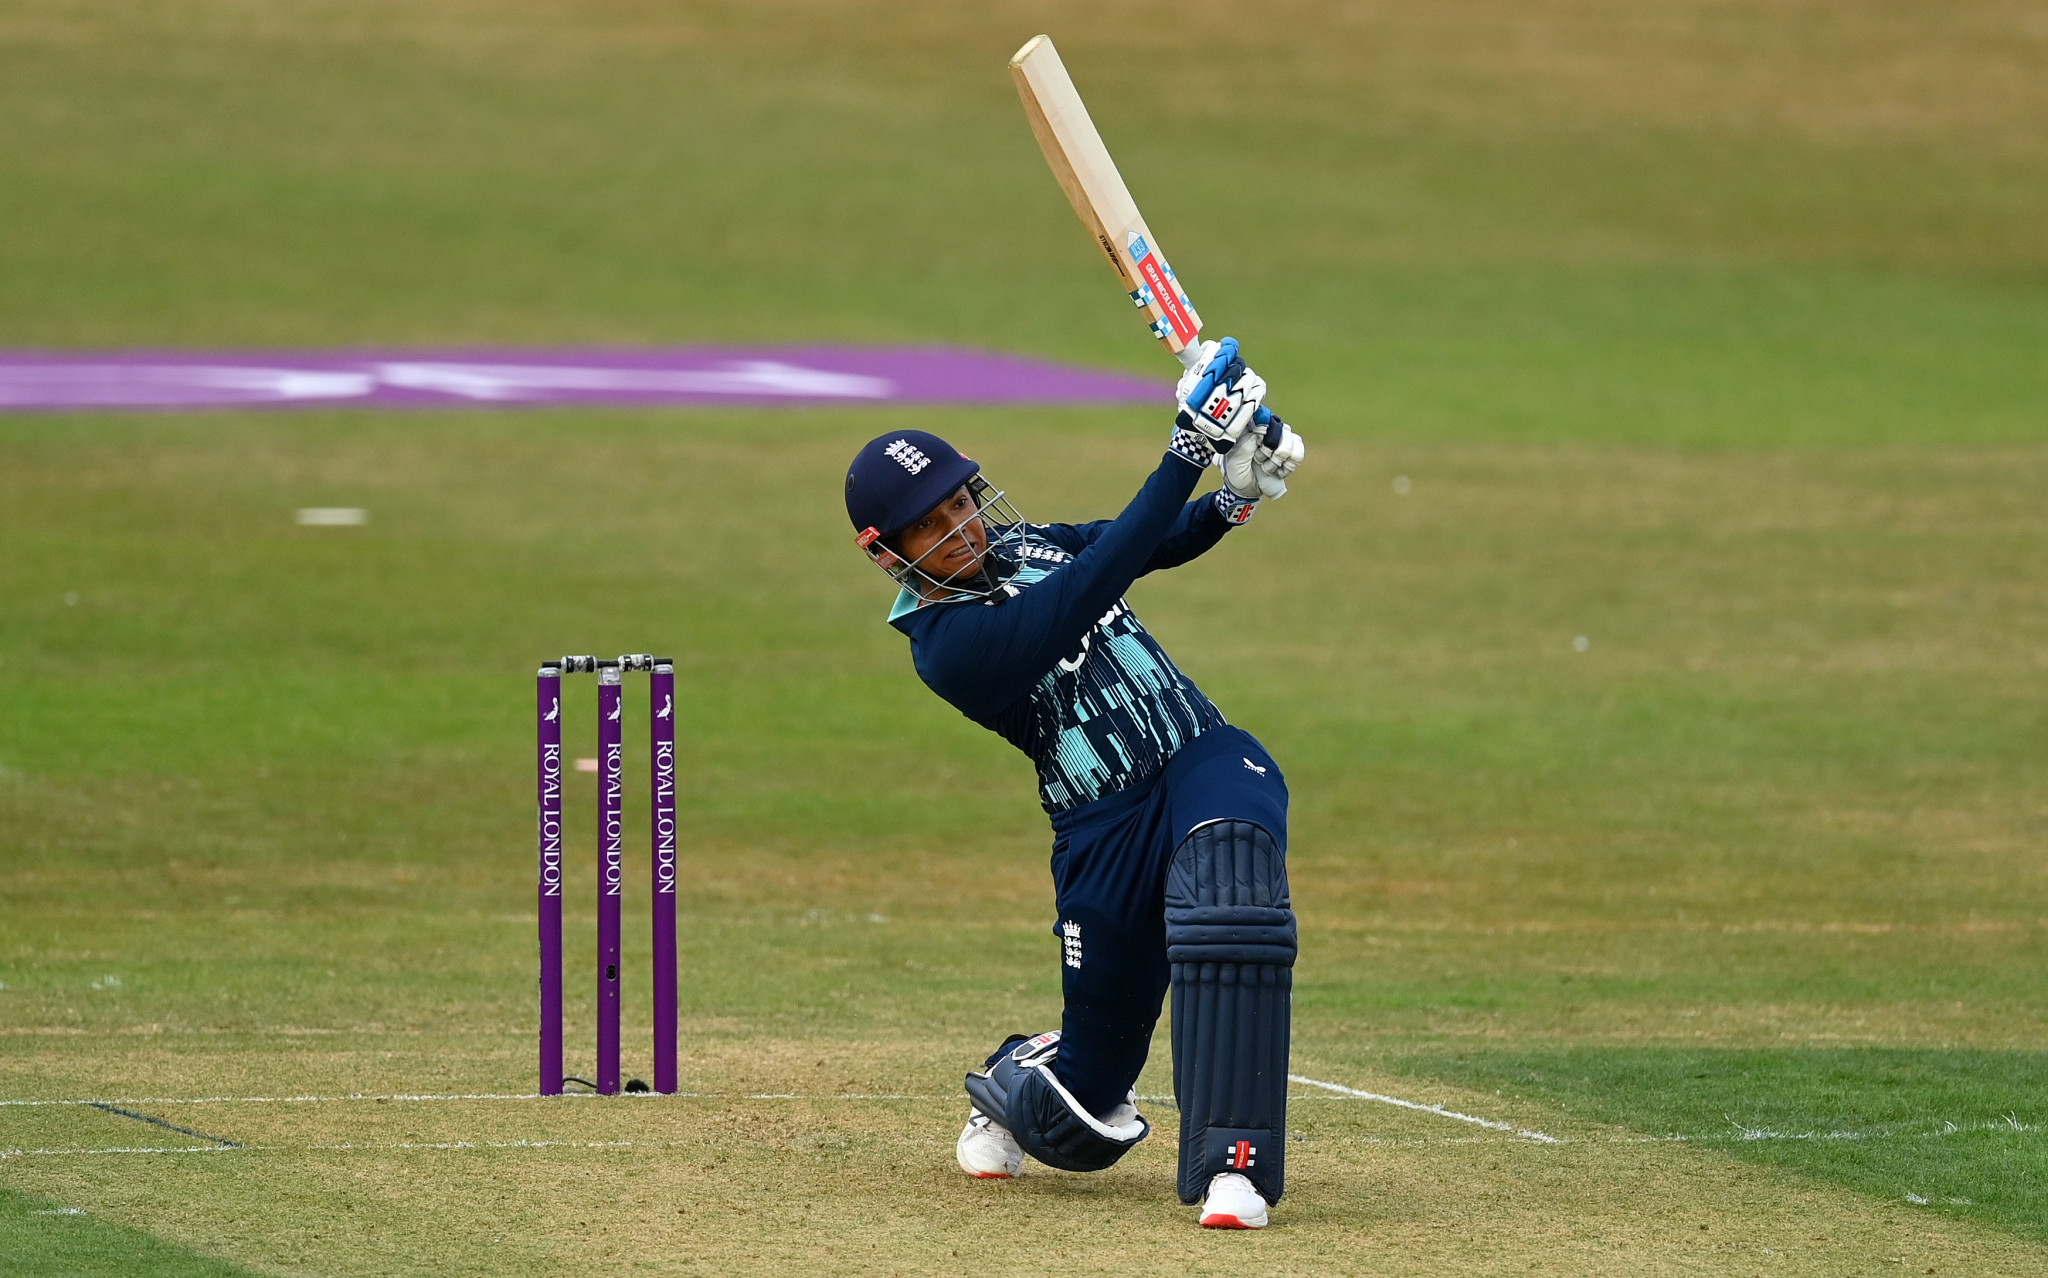 England's rising star Sophia Dunkley scored her first international century last week and will hope to play a major role at Birmingham 2022 ©Getty Images